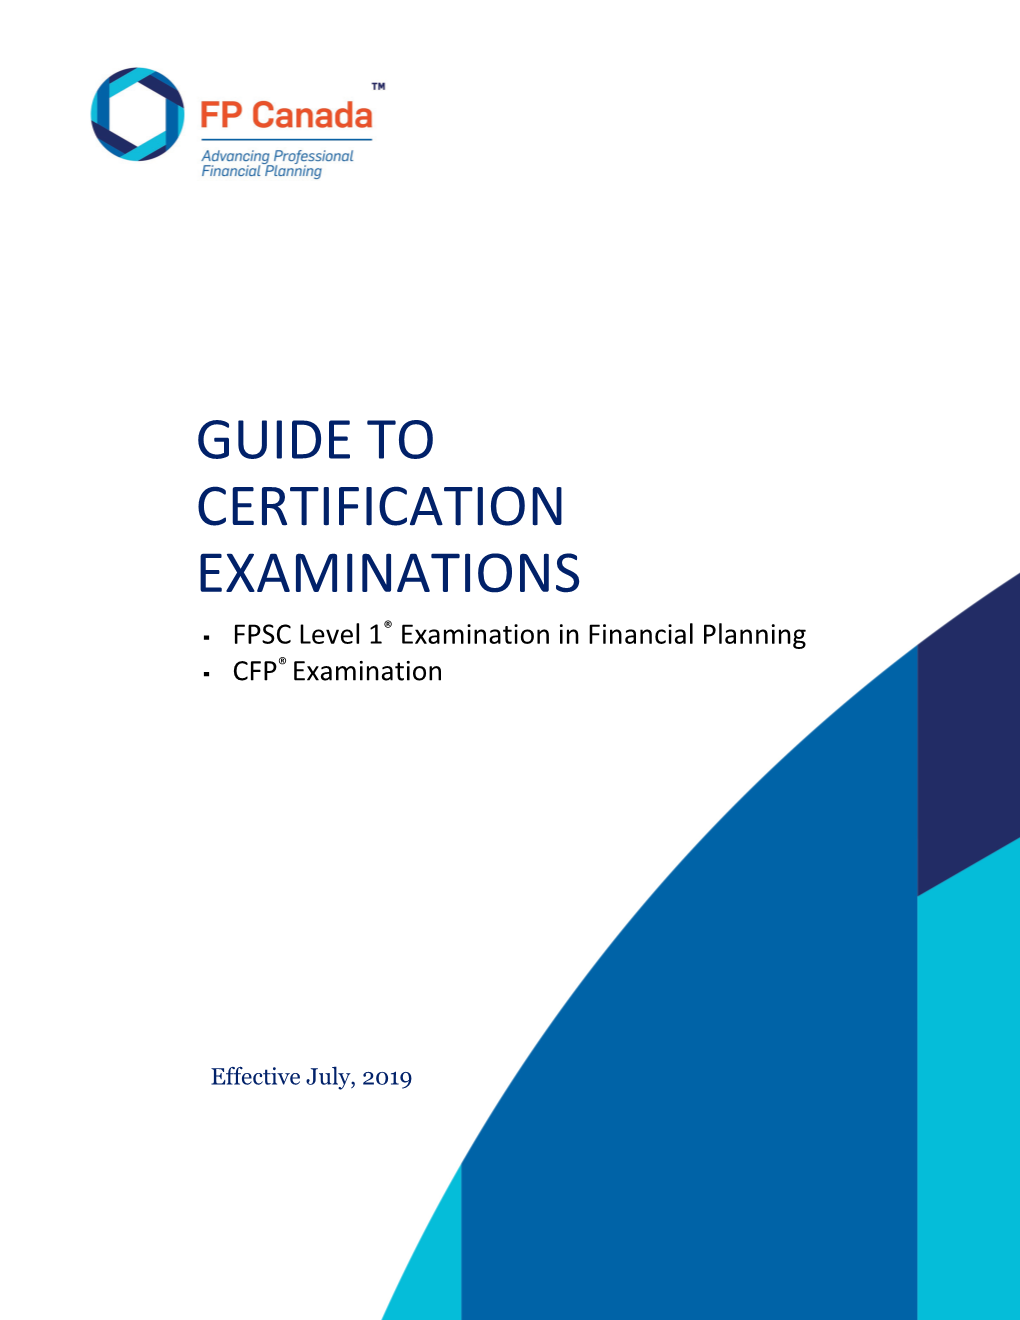 GUIDE to CERTIFICATION EXAMINATIONS ® ▪ FPSC Level 1 Examination in Financial Planning ® ▪ CFP Examination